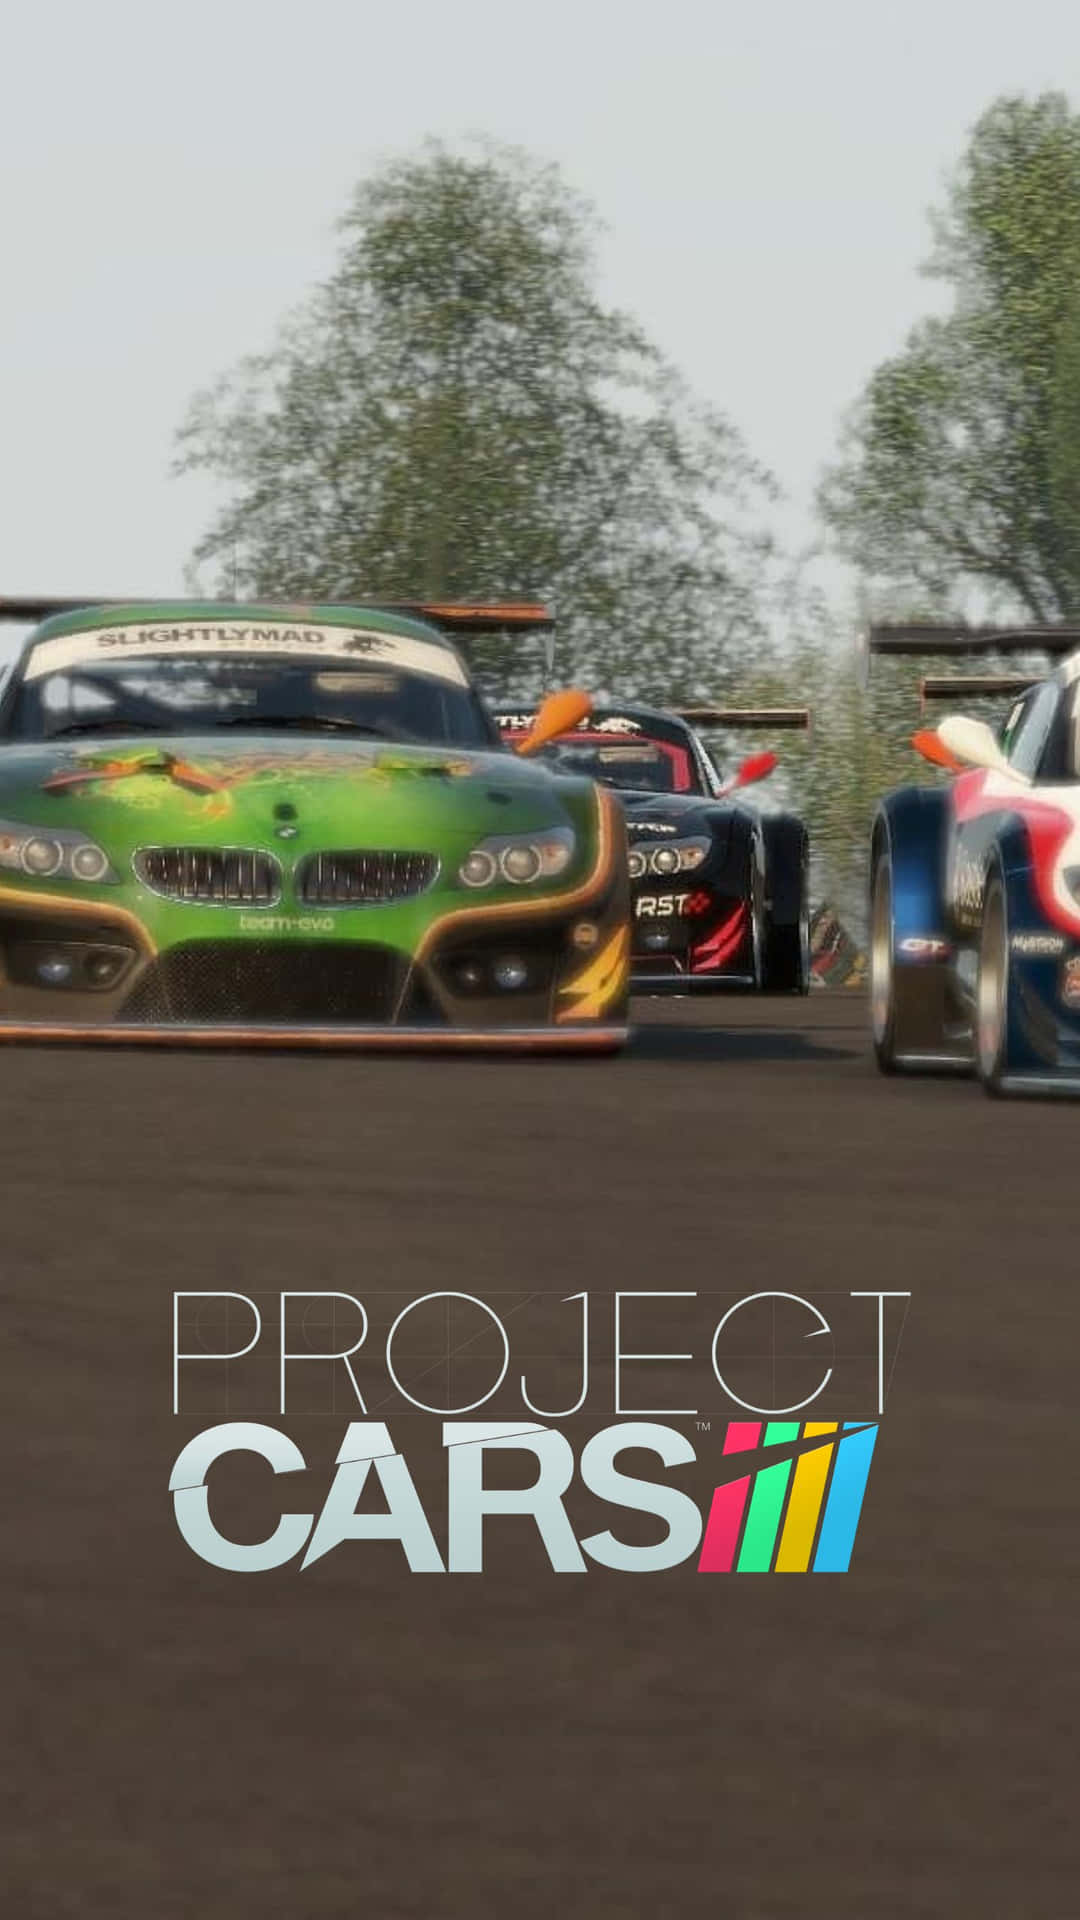 A custom Project Cars game loading screen on an Android mobile device.